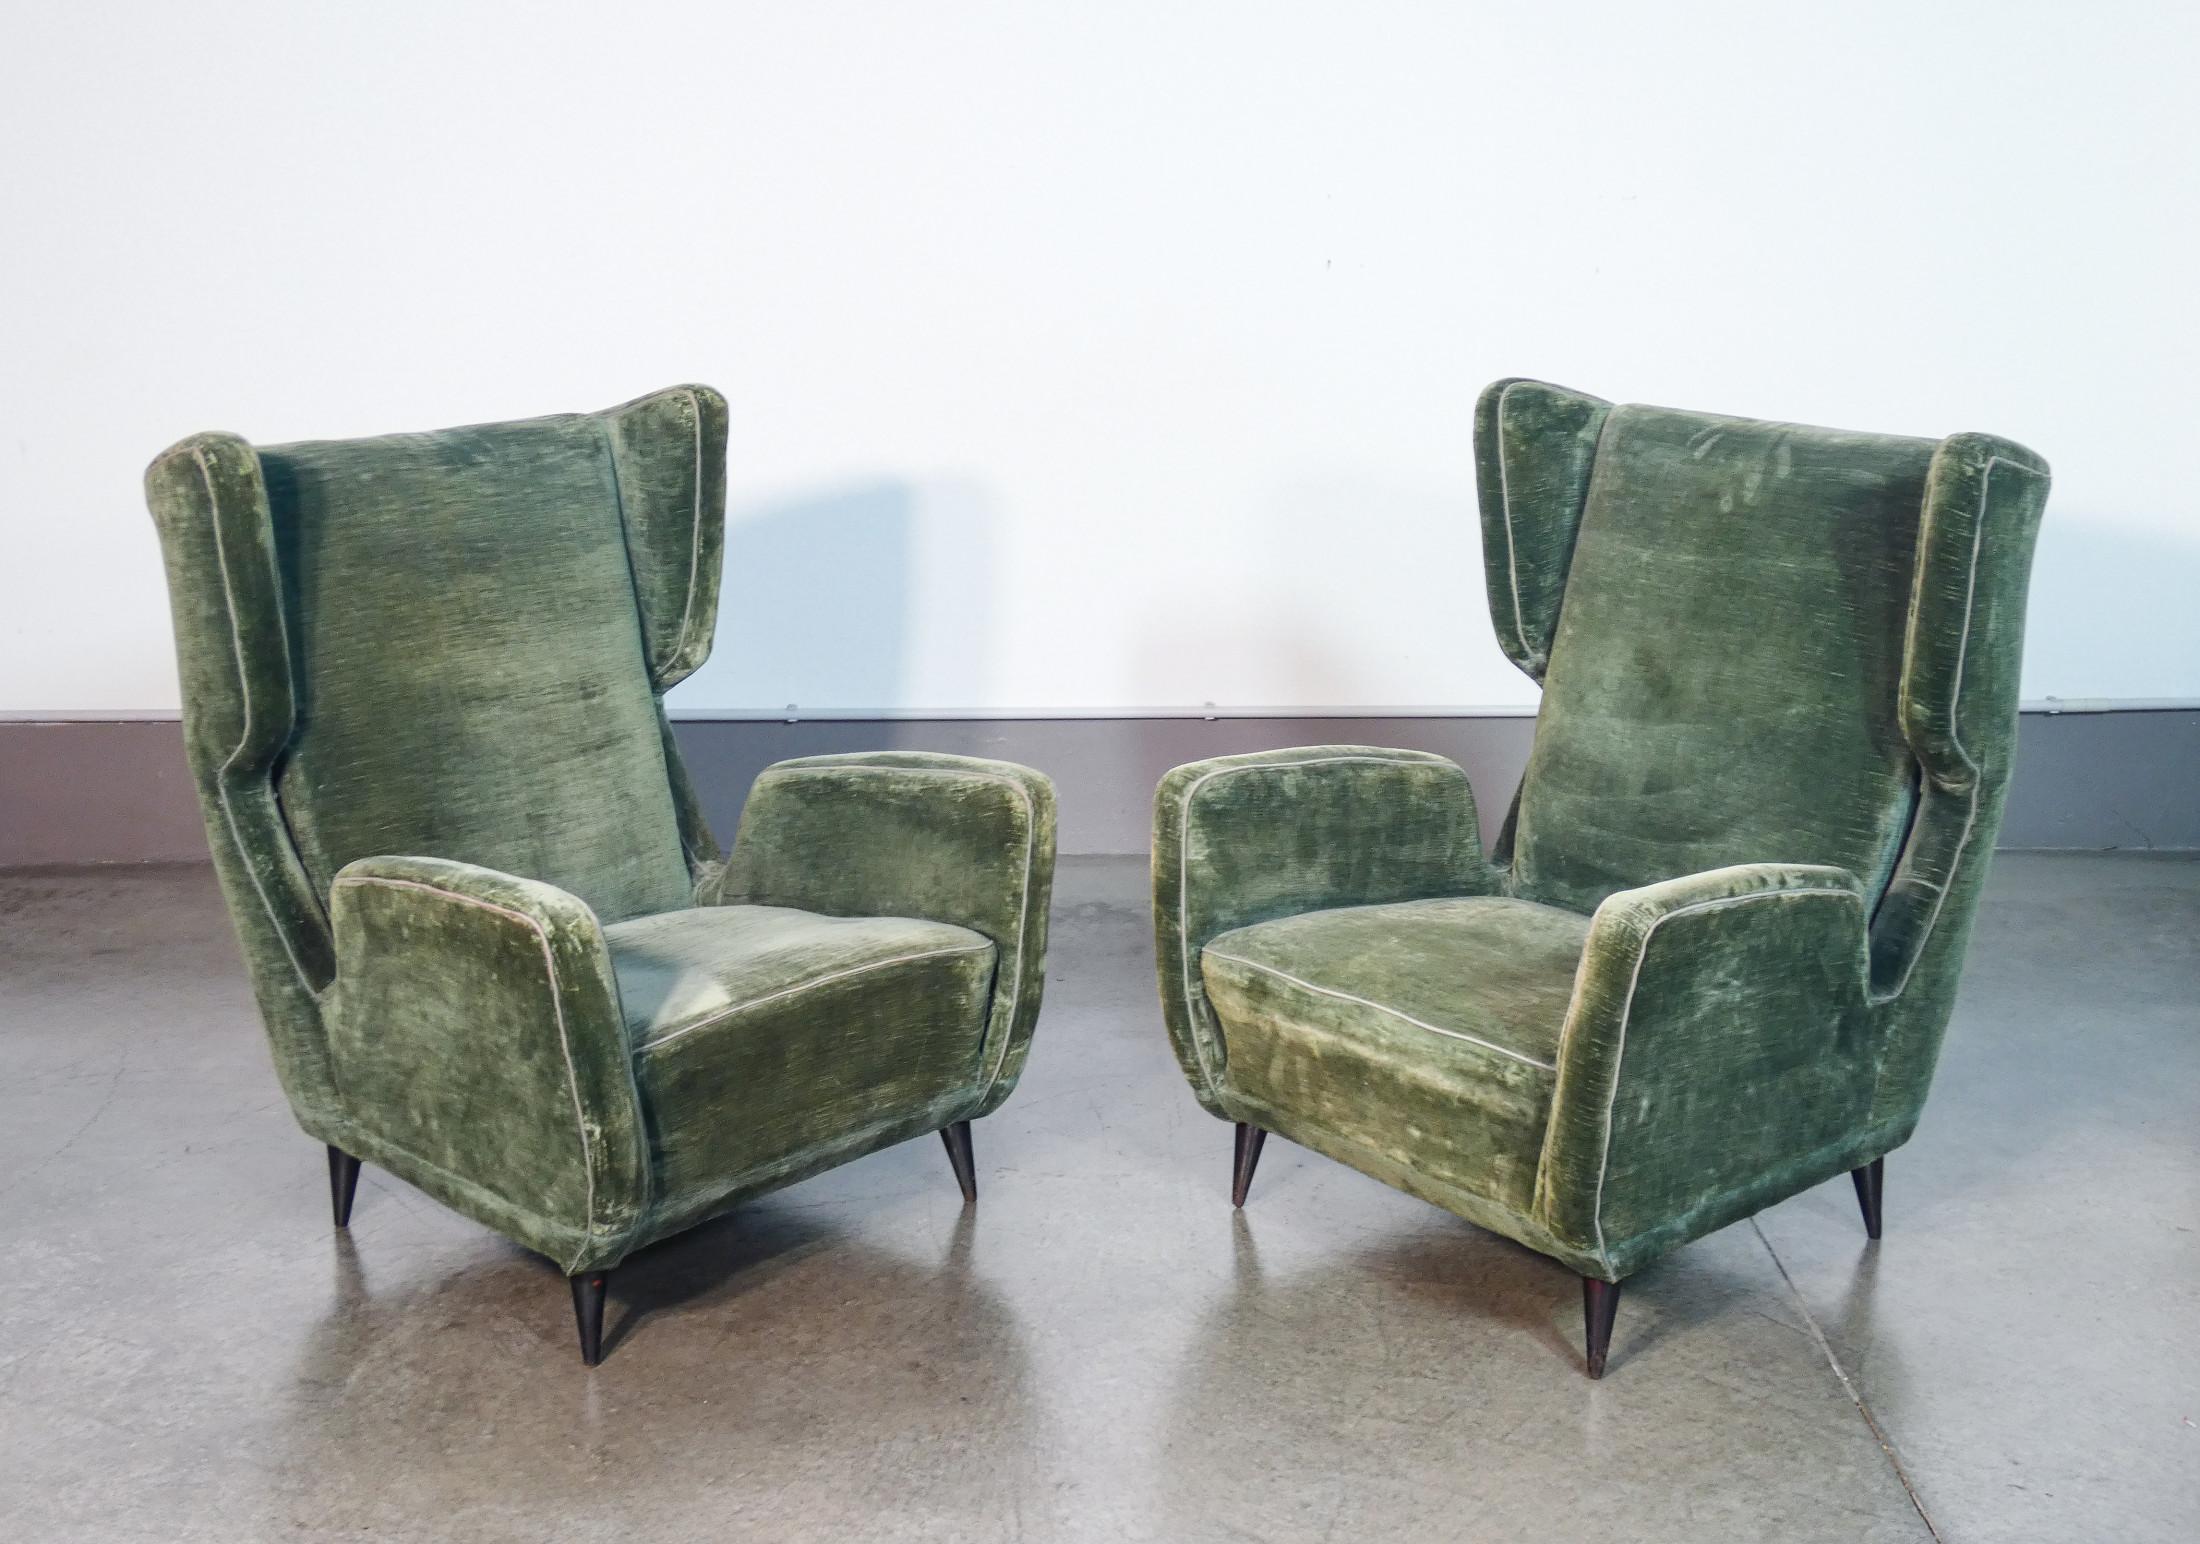 Italian Pair of armchairs attributed to the hand of Giulio MINOLETTI & Giò PONTI. 1950s